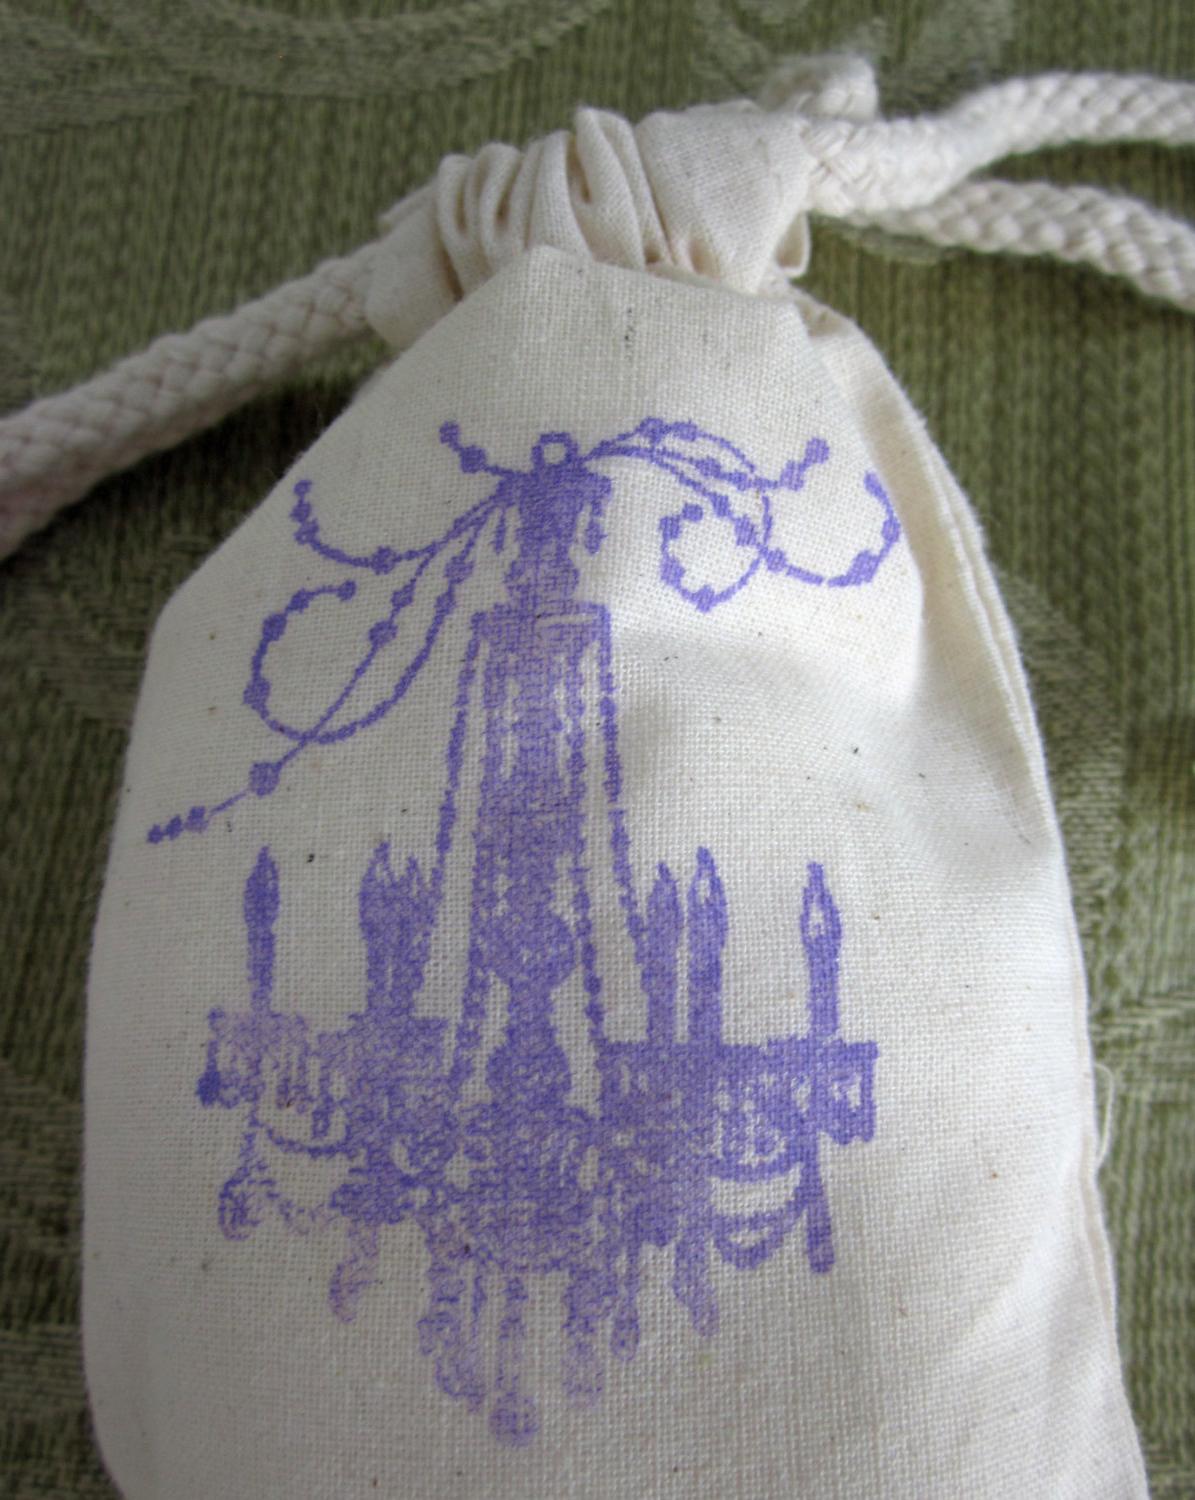 Wedding Favors, 10 Chandelier Cotton Favor Bags 3x5. From lifeissobeautiful